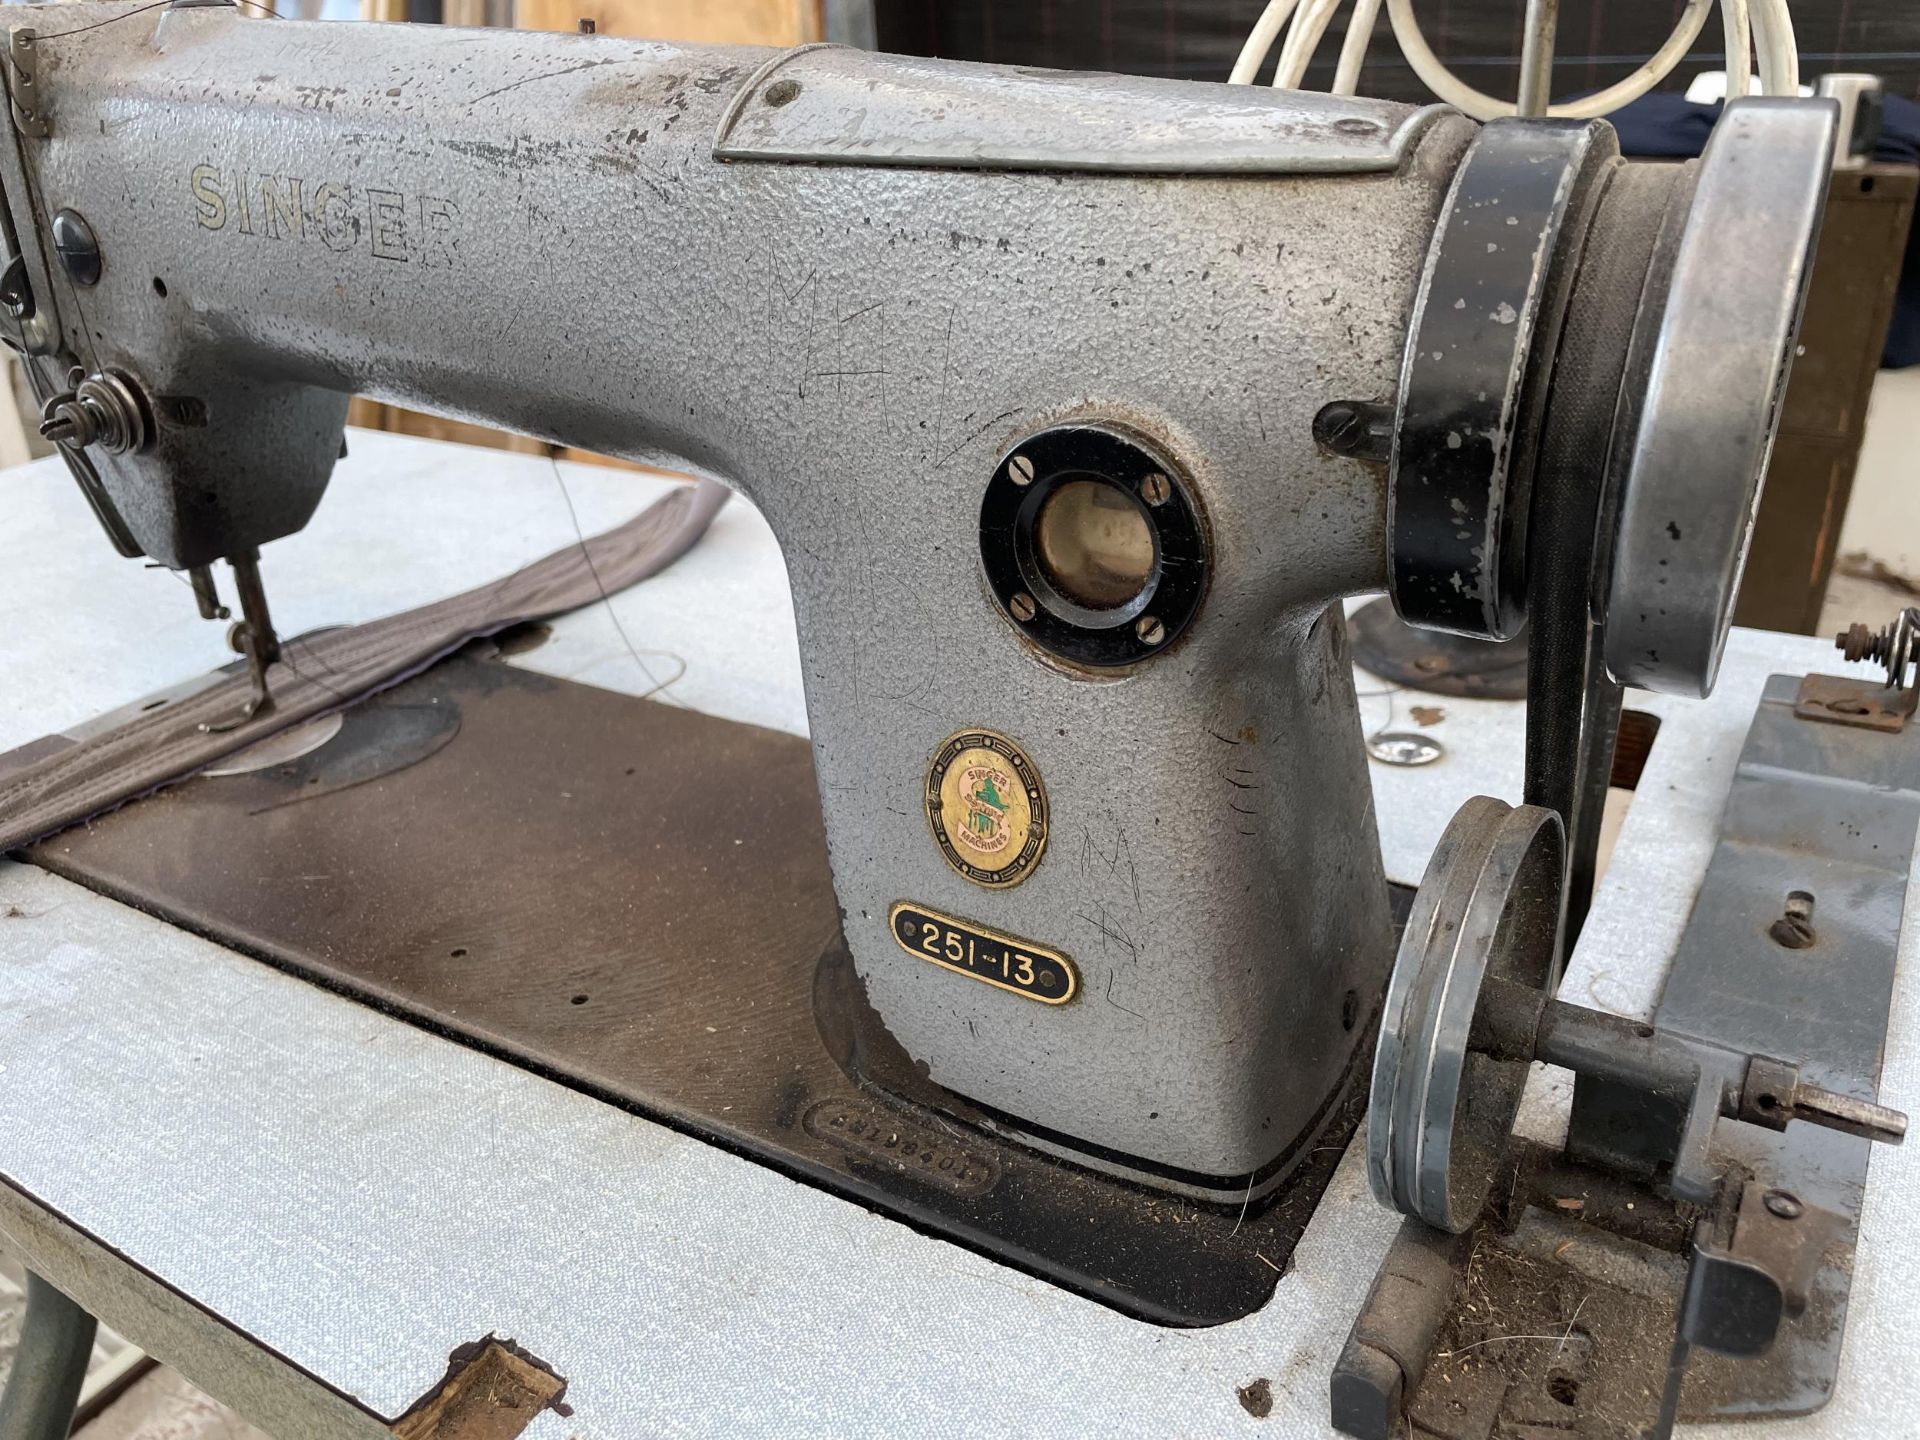 AN INDUSTRIAL SINGER SEWING MACHINE 251-13 - Image 4 of 6